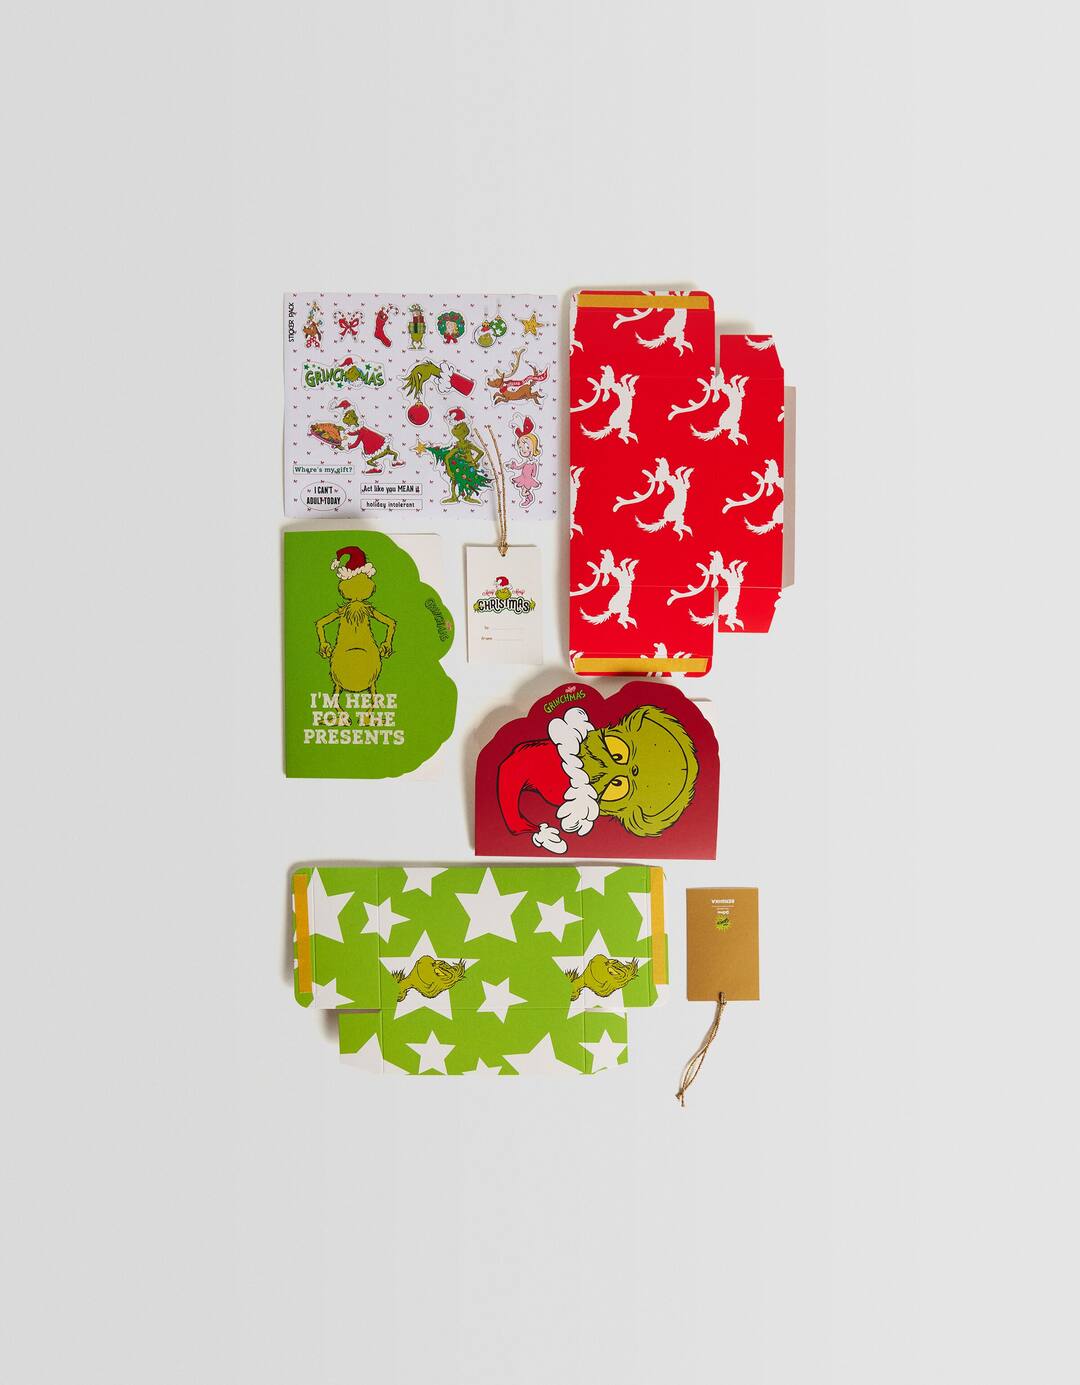 The Grinch gift wrapping kit